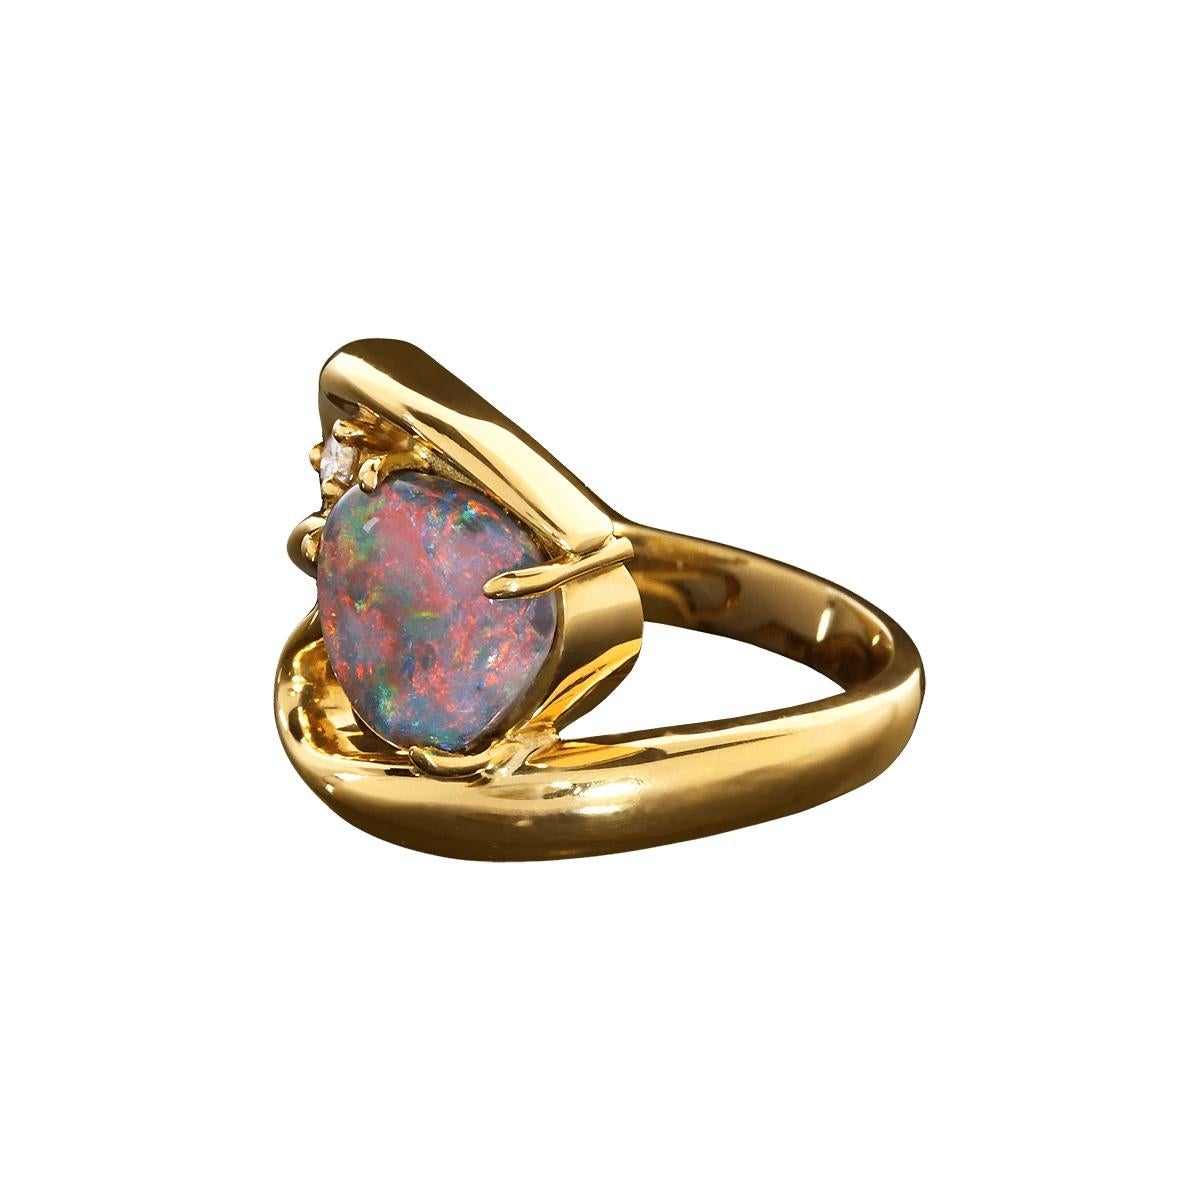 Jewellery is wearable art and this stunning ring is no exception. With its high-domed solid black opal displaying bright flashes of red, orange, purples, greens and blues, it is a truly unique piece. A sparkling white, high jewellery grade, diamond